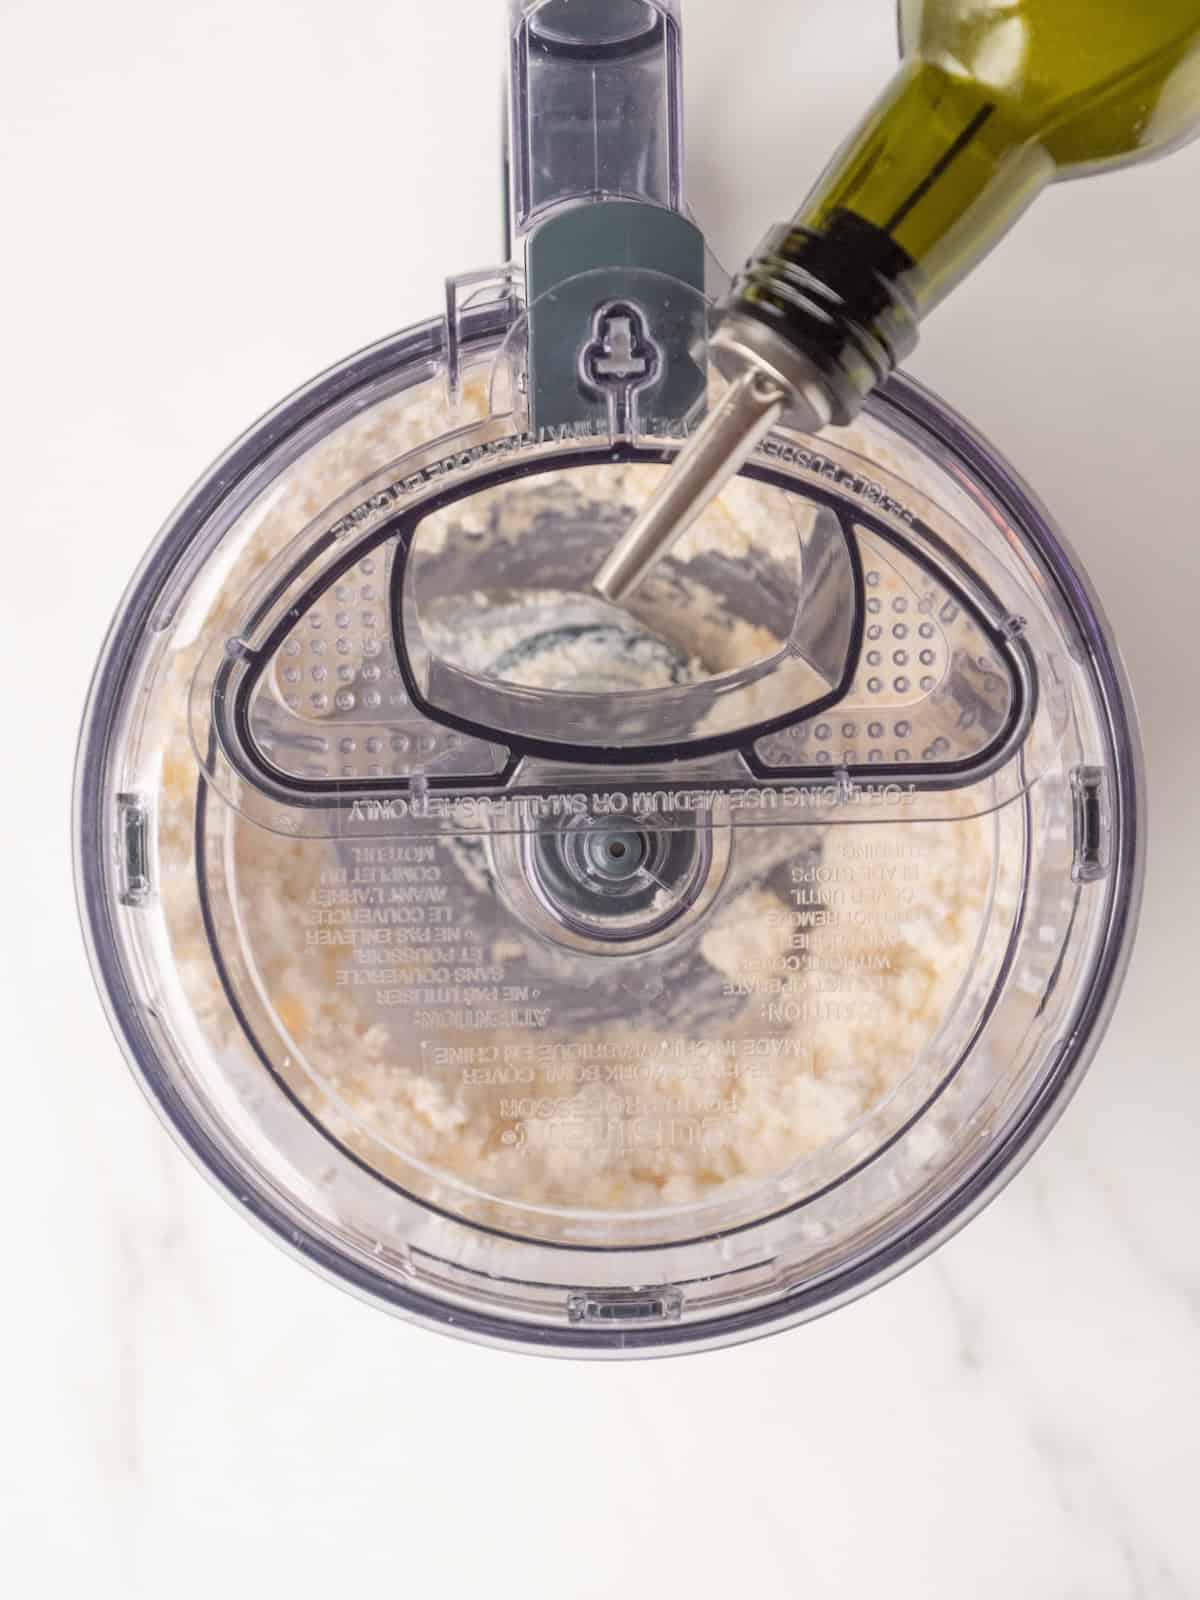 A blender with whipped feta being made, and extra virgin olive oil being drizzled through the opening on top.